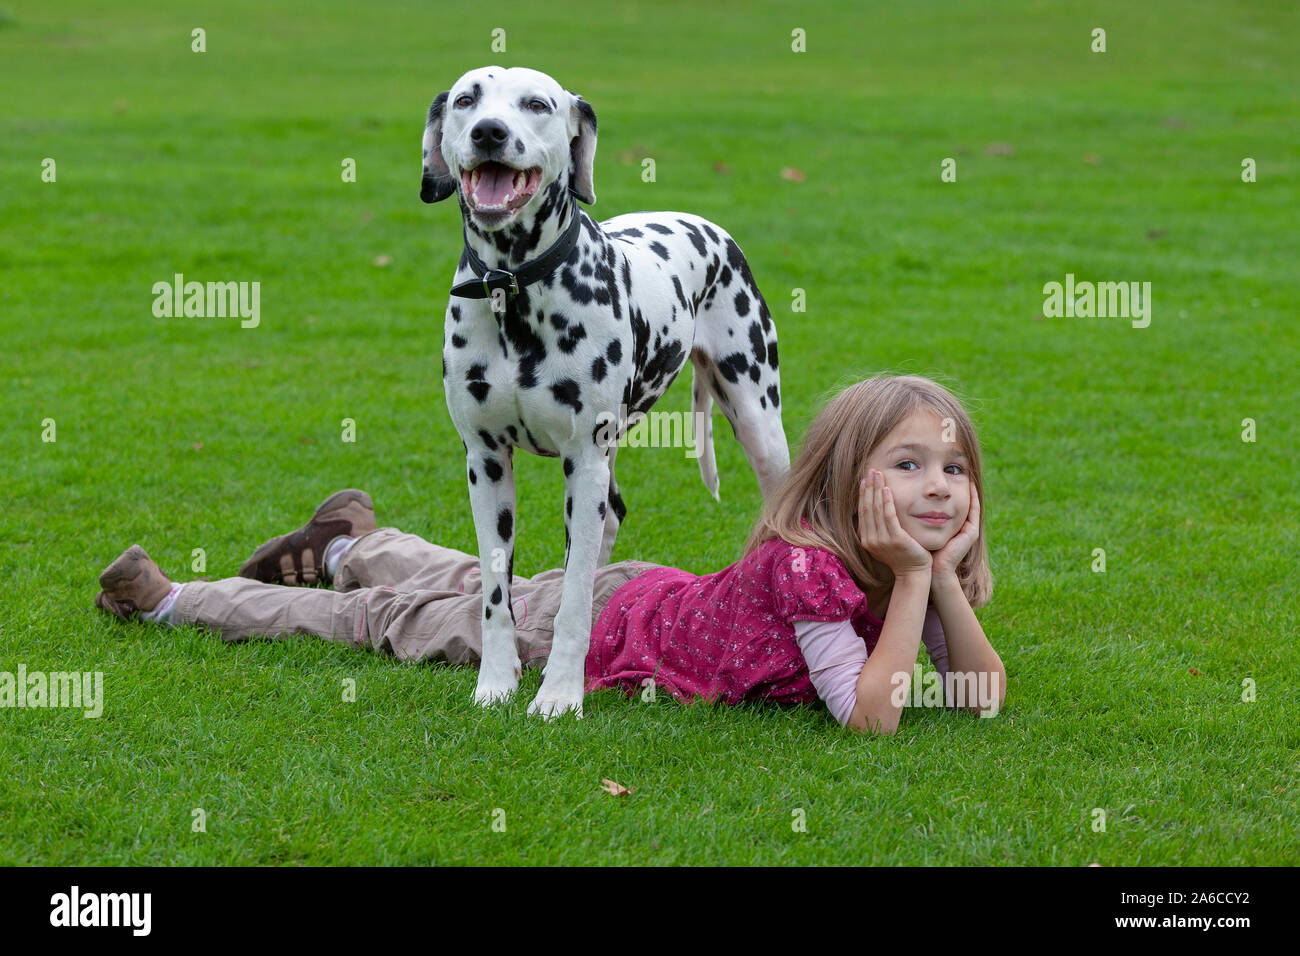 Portrait of a little girl with a Dalmatian. Stock Photo